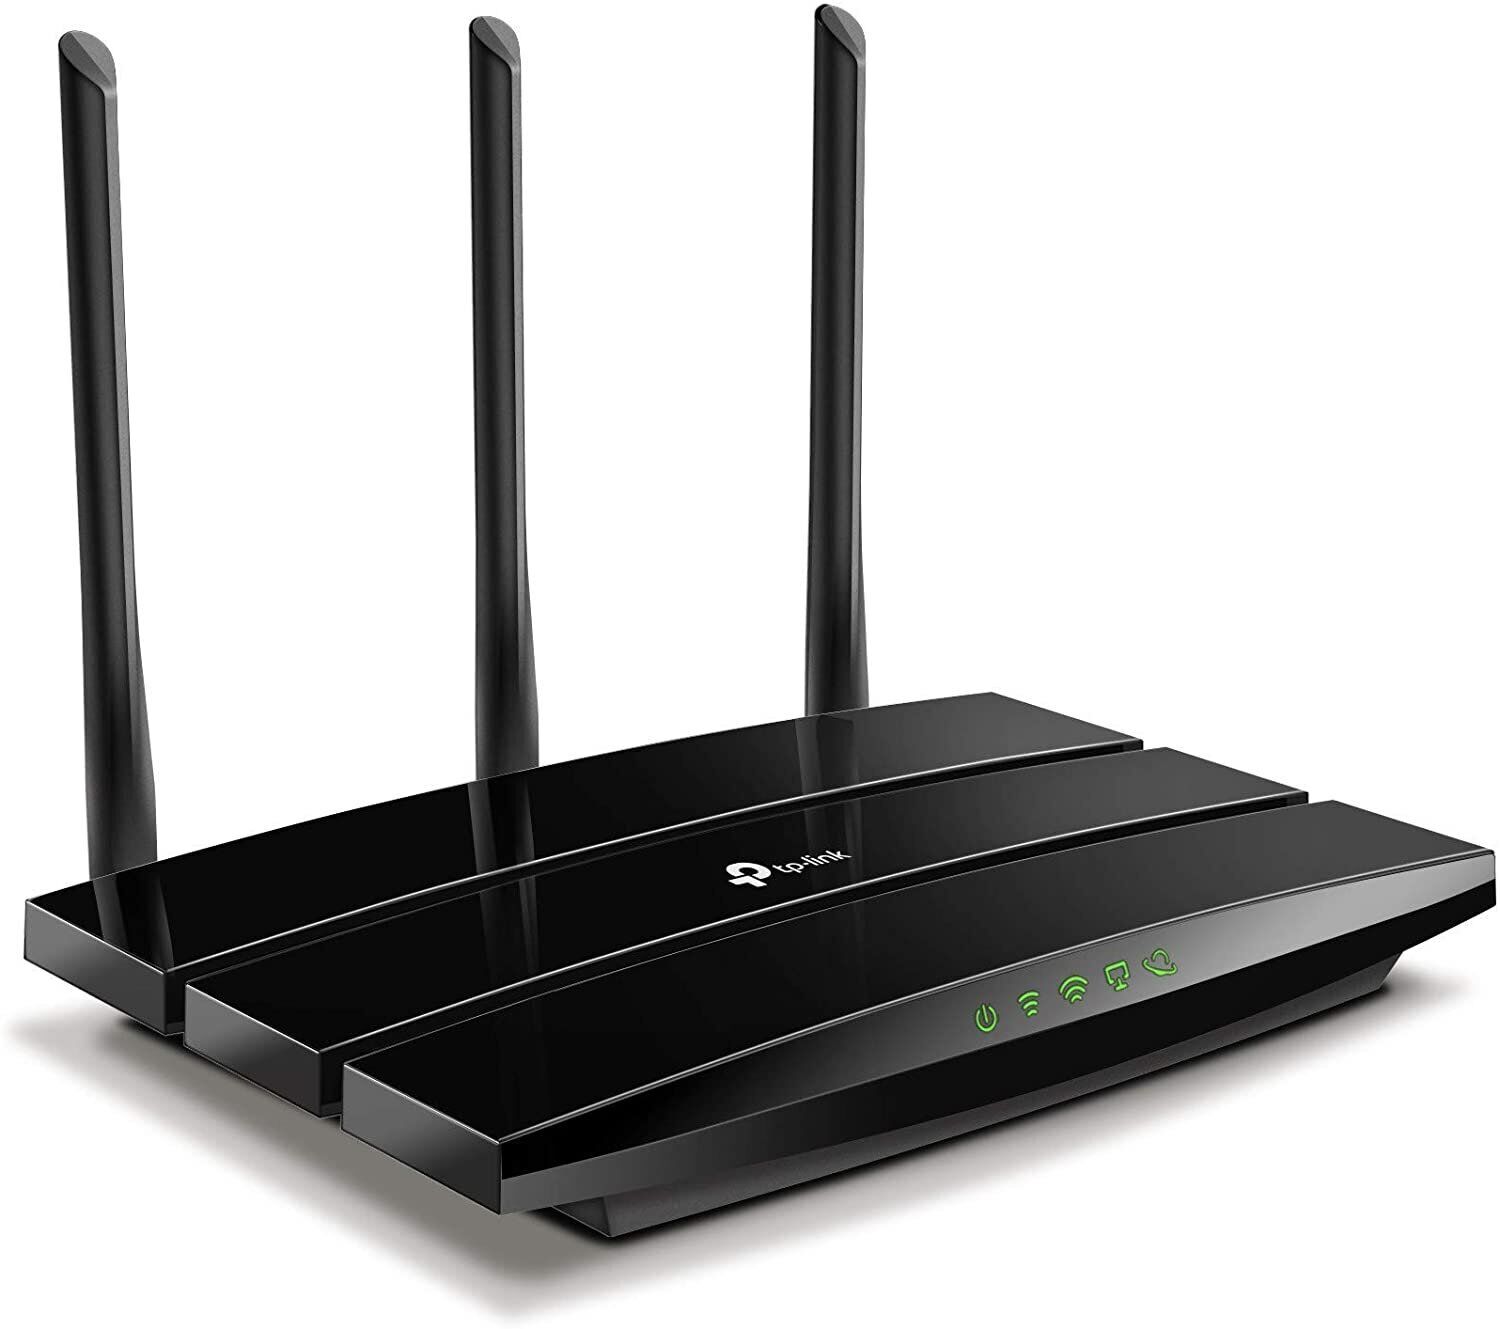 TP-Link AC1900 Smart WiFi Router - High Speed MU-MIMO Wireless Router (Renewed)